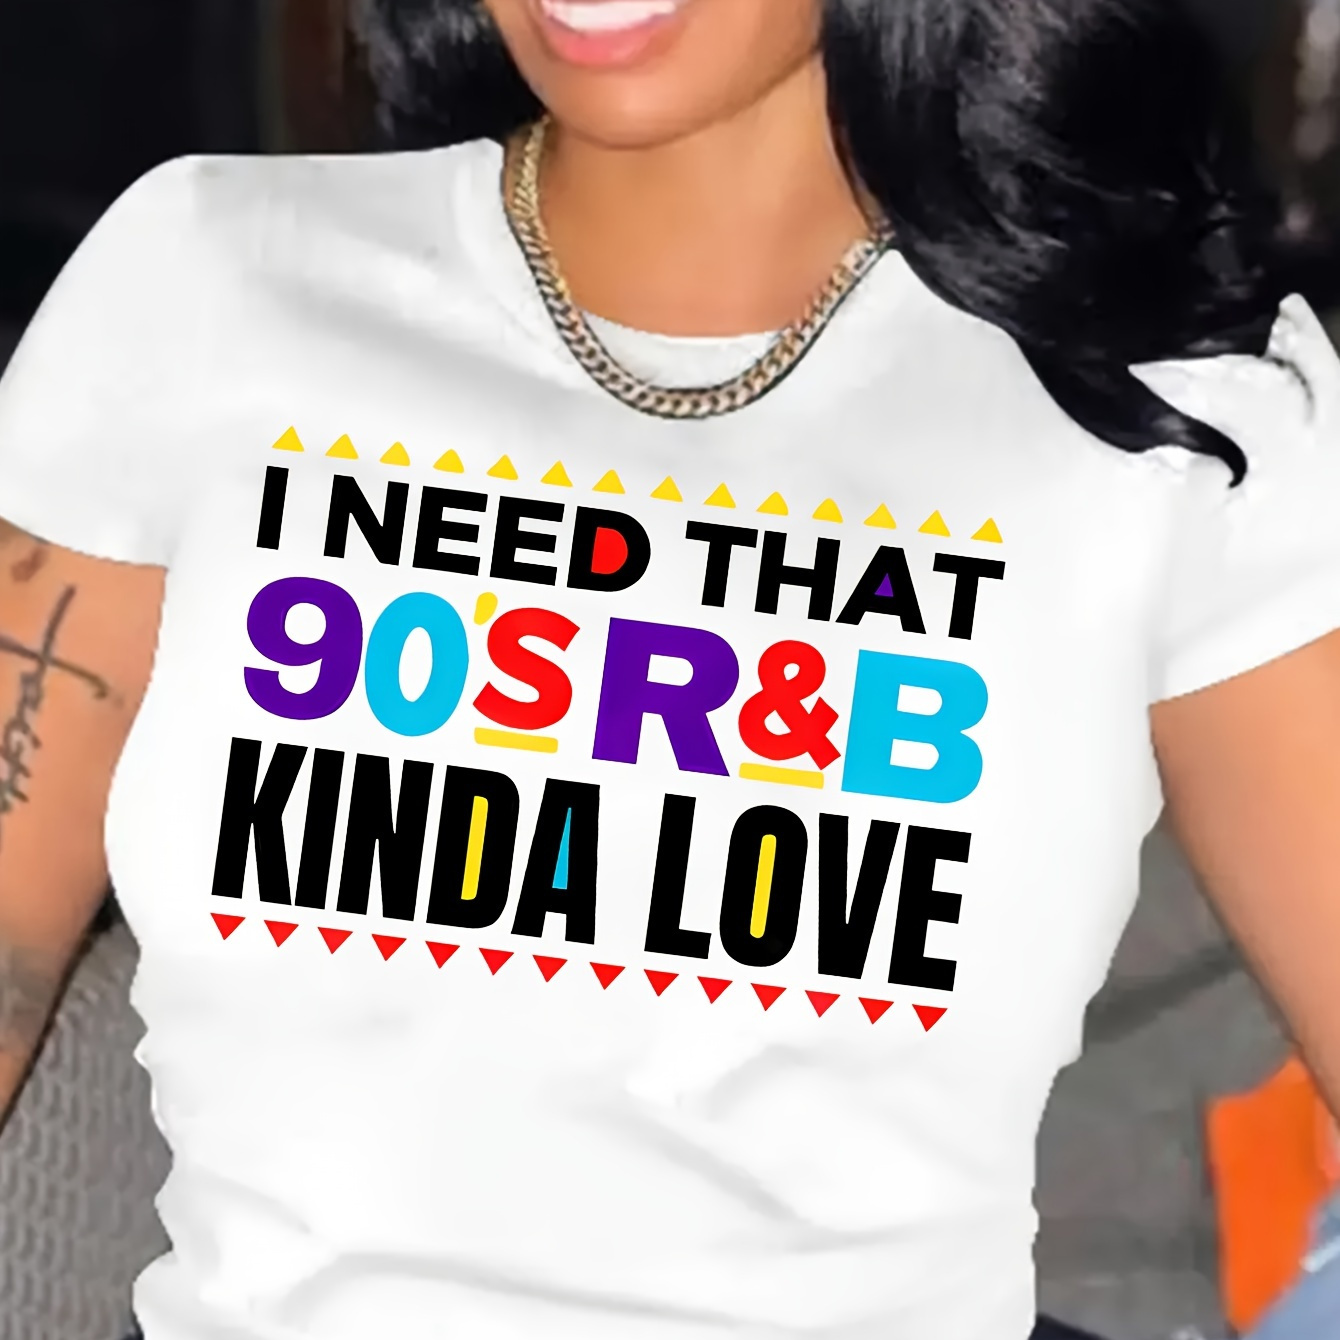 

I Need That 90s Kinda Love Print T-shirt, Short Sleeve Crew Neck Casual Top For Summer & Spring, Women's Clothing